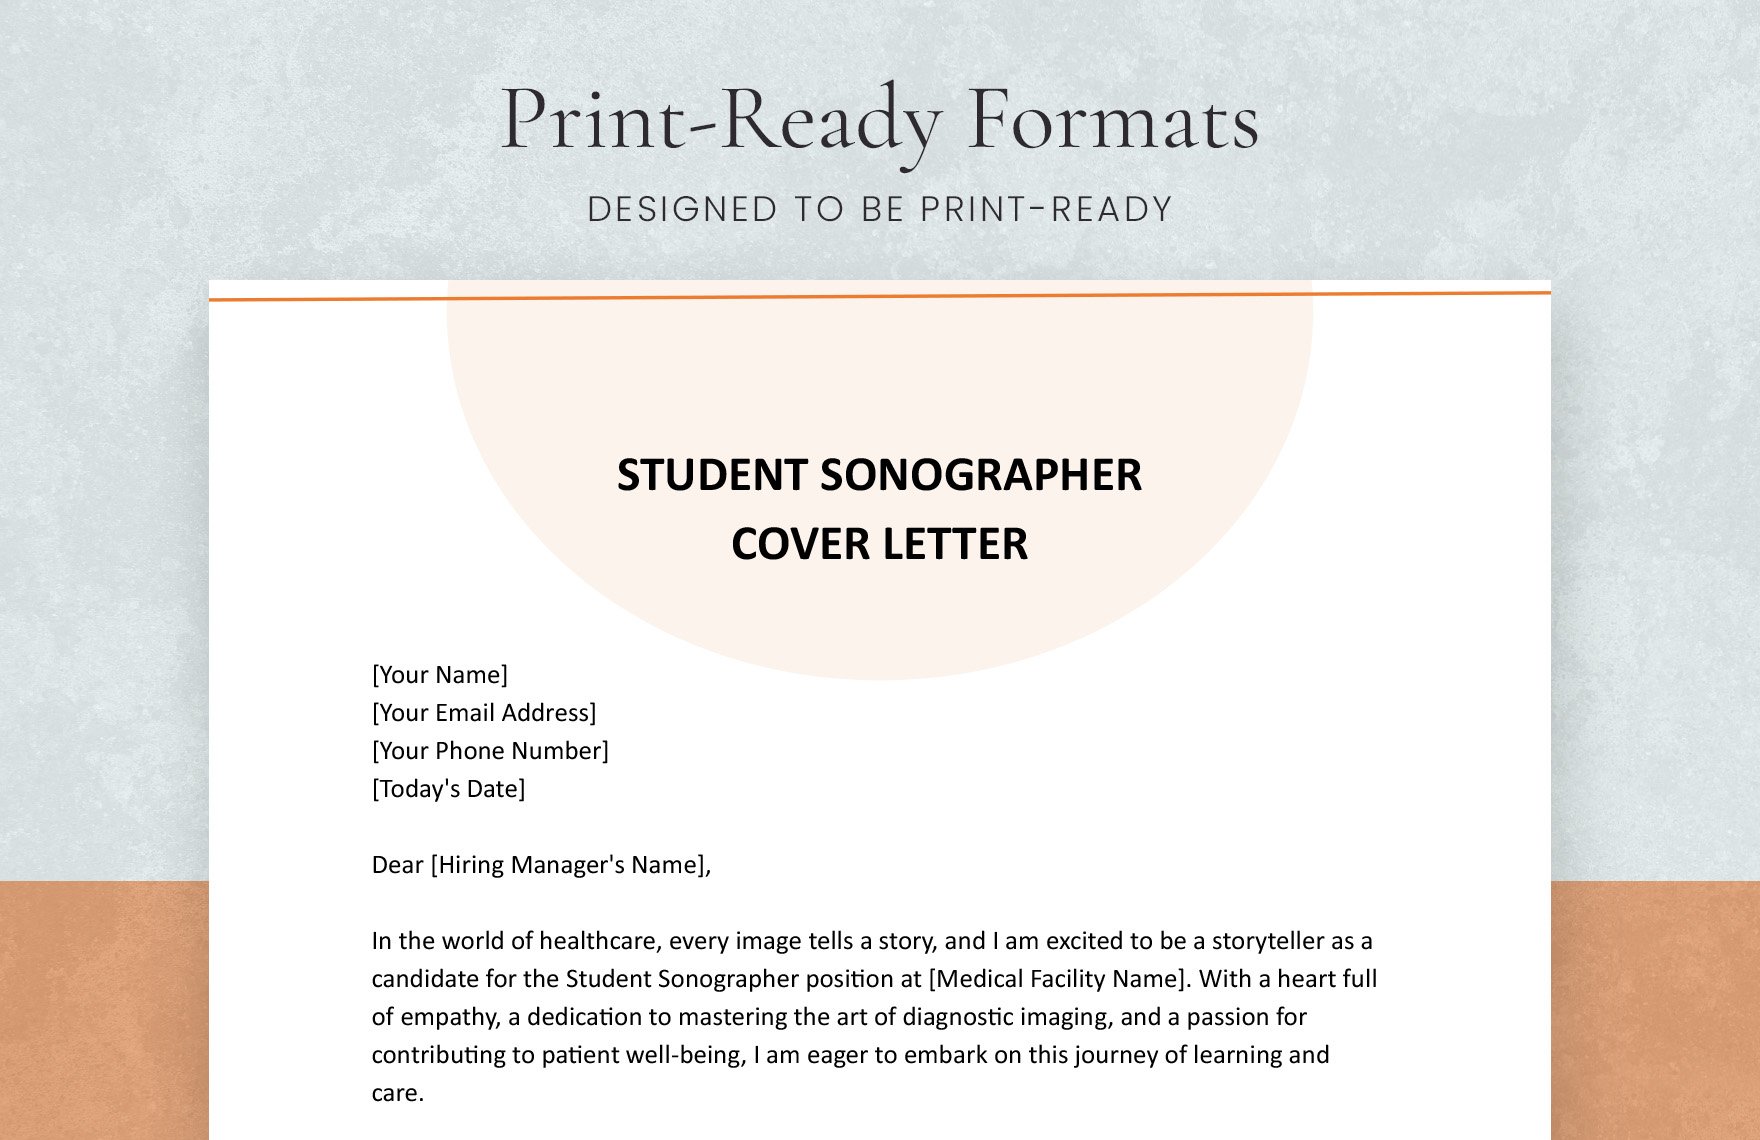 Student Sonographer Cover Letter